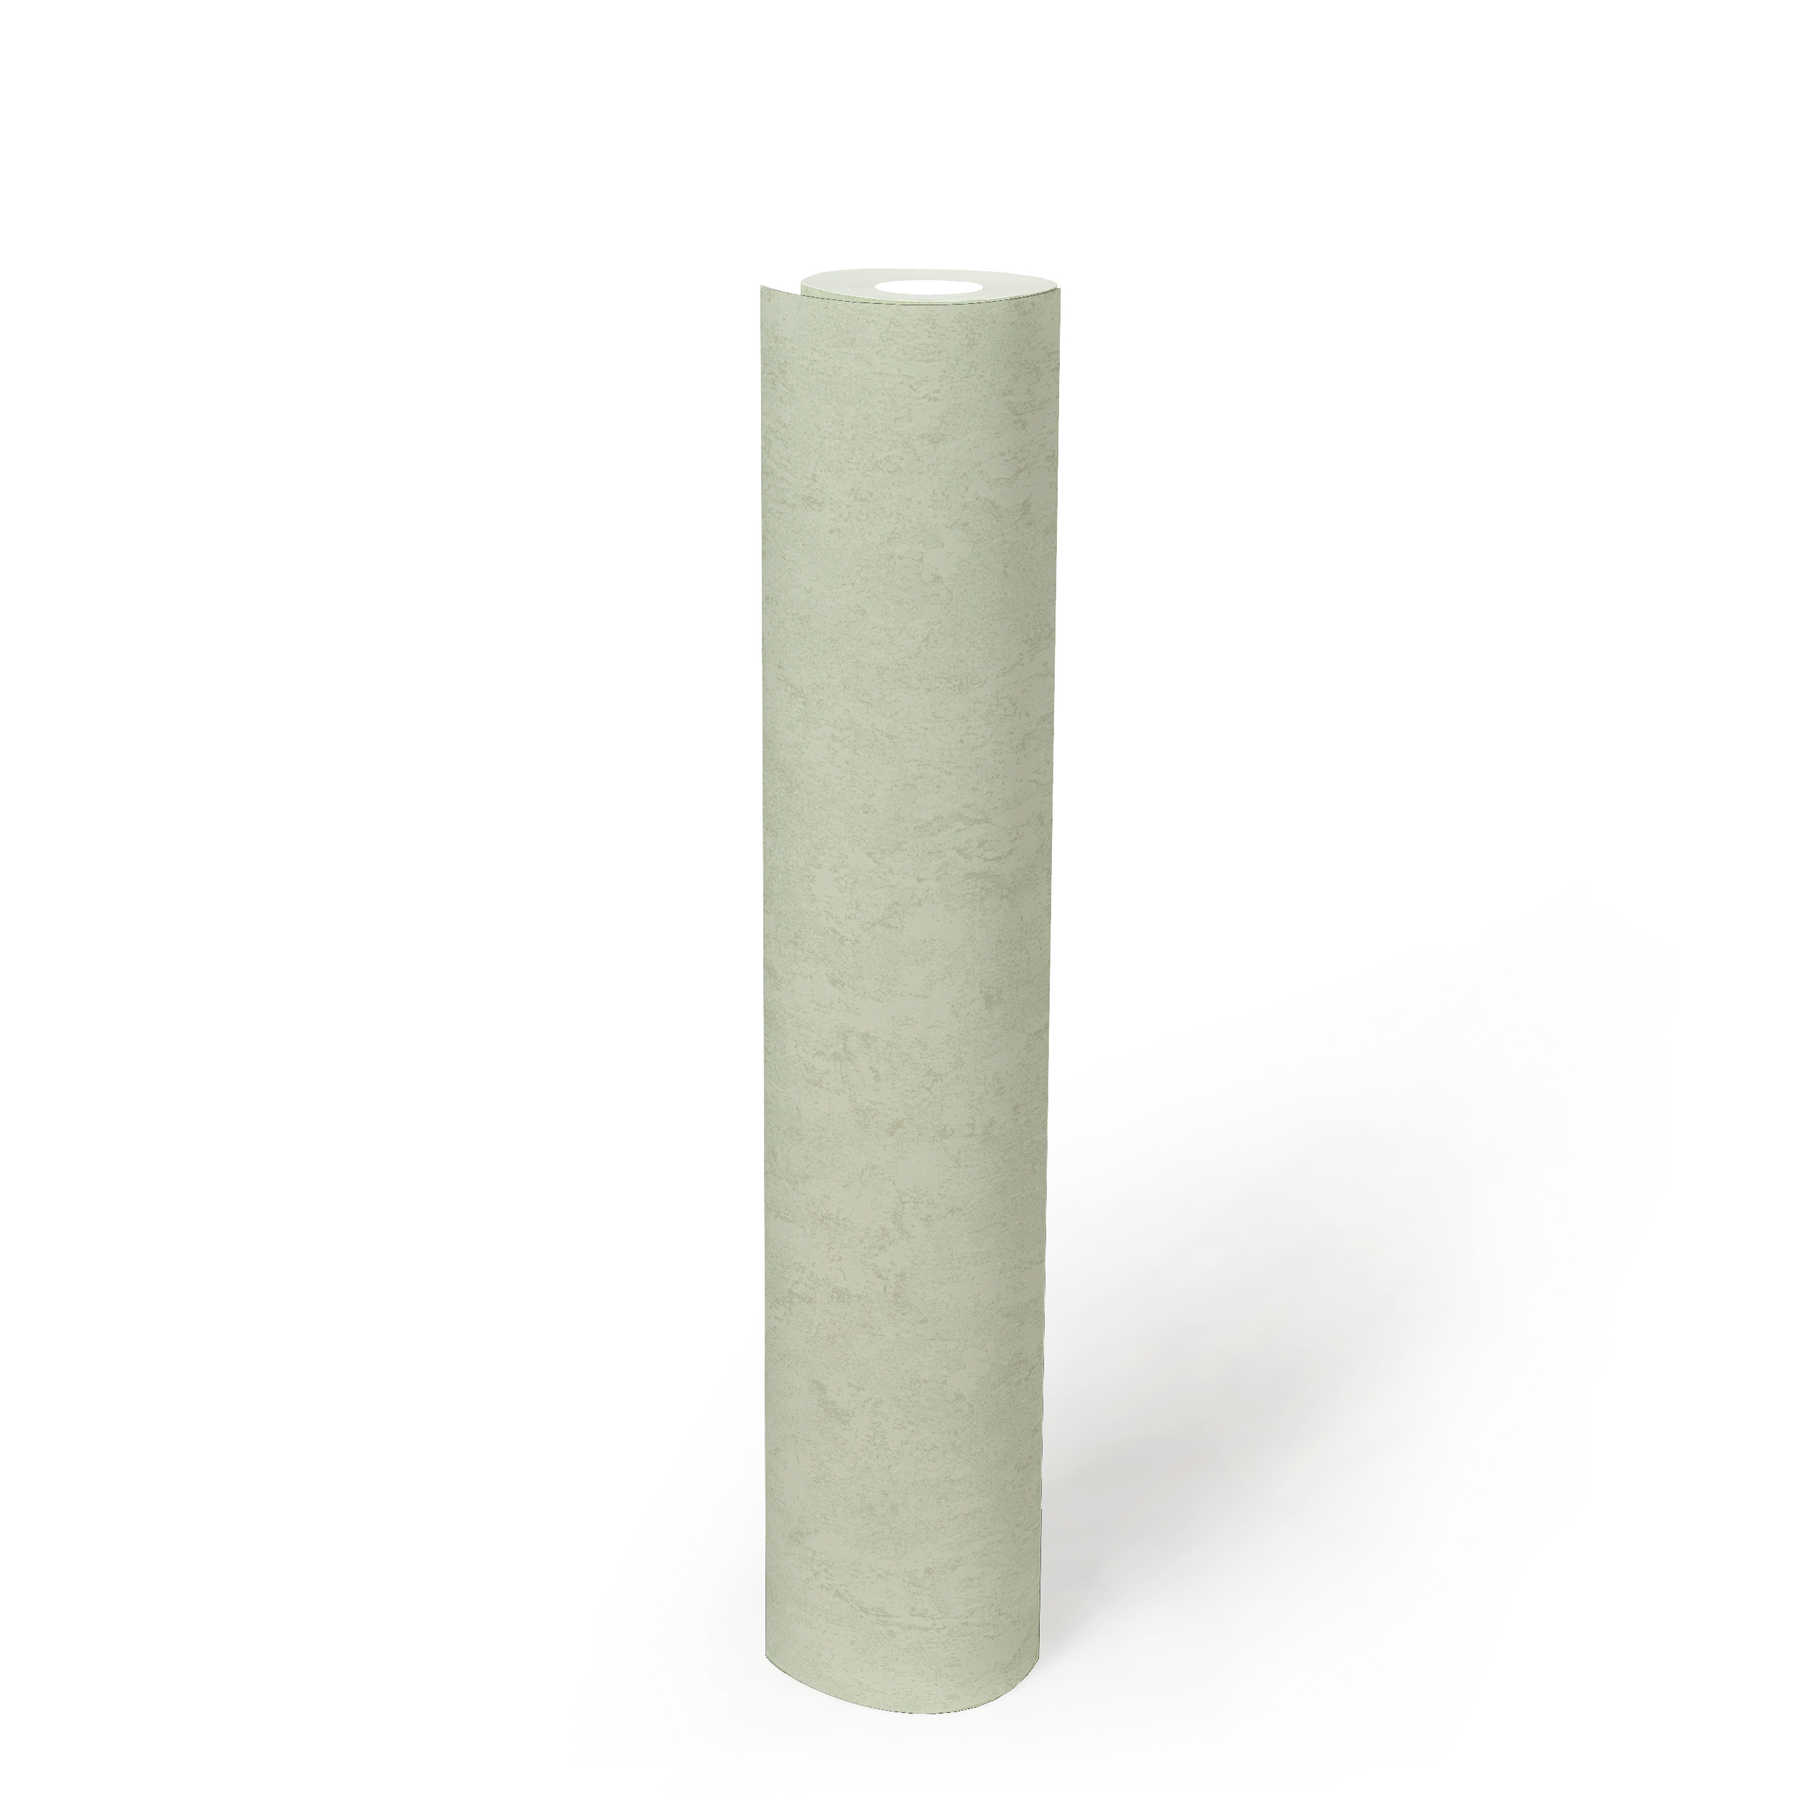             Metallic wallpaper light green glossy with structure embossing
        